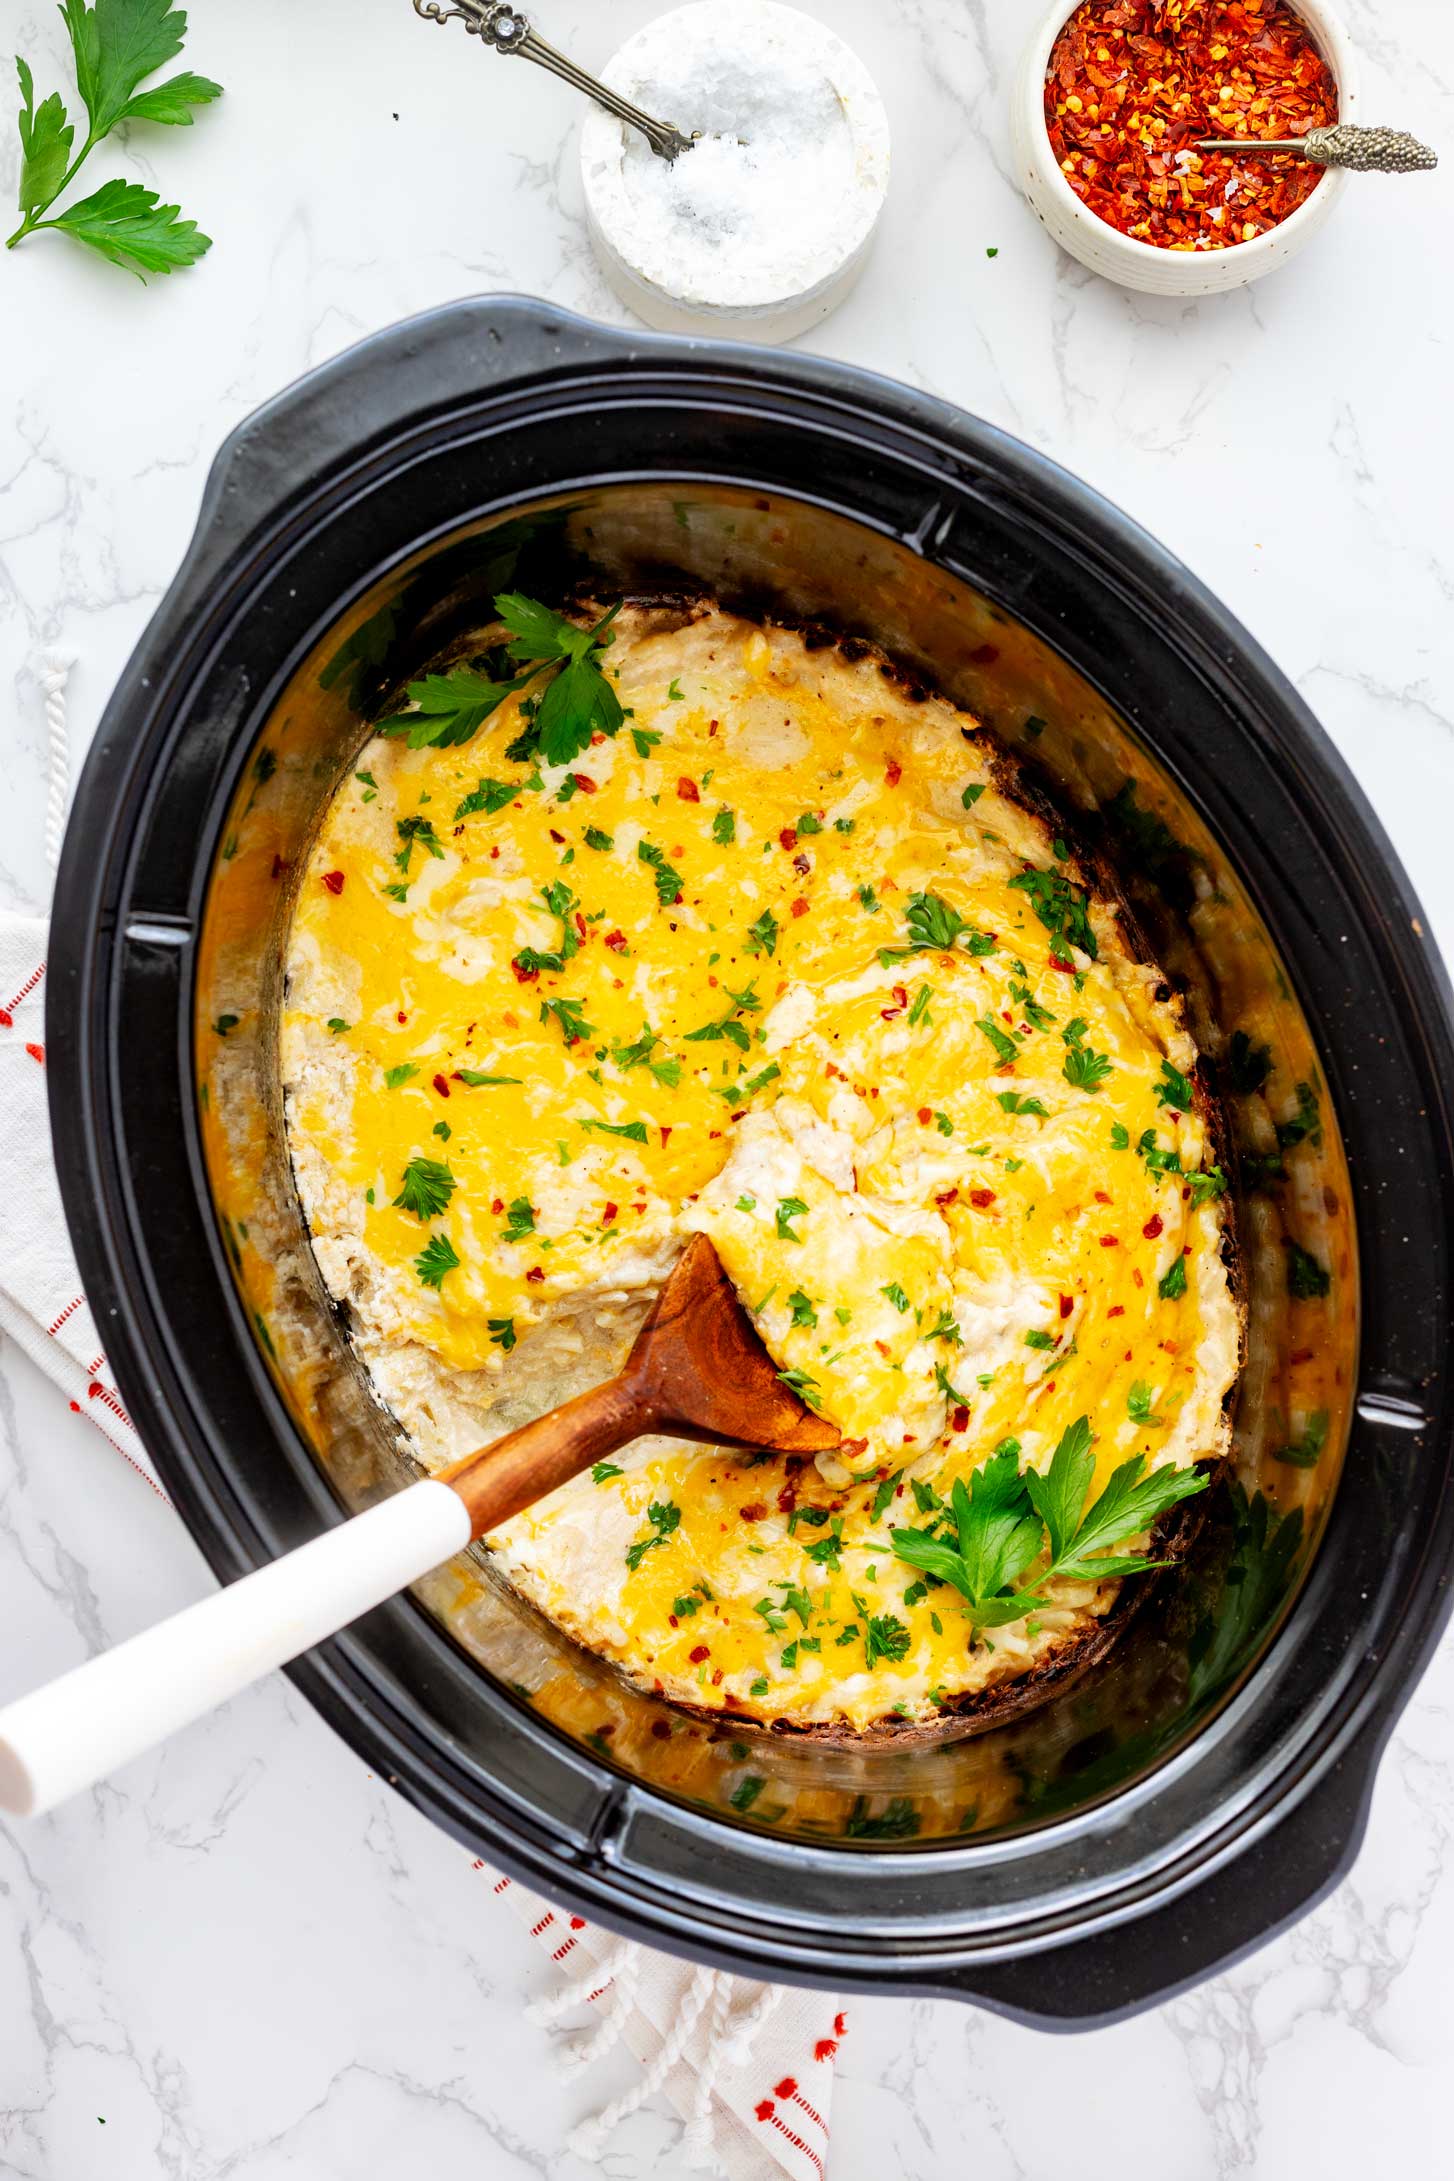 Overhead photo of a hash brown casserole in a crockpot with a spoon.